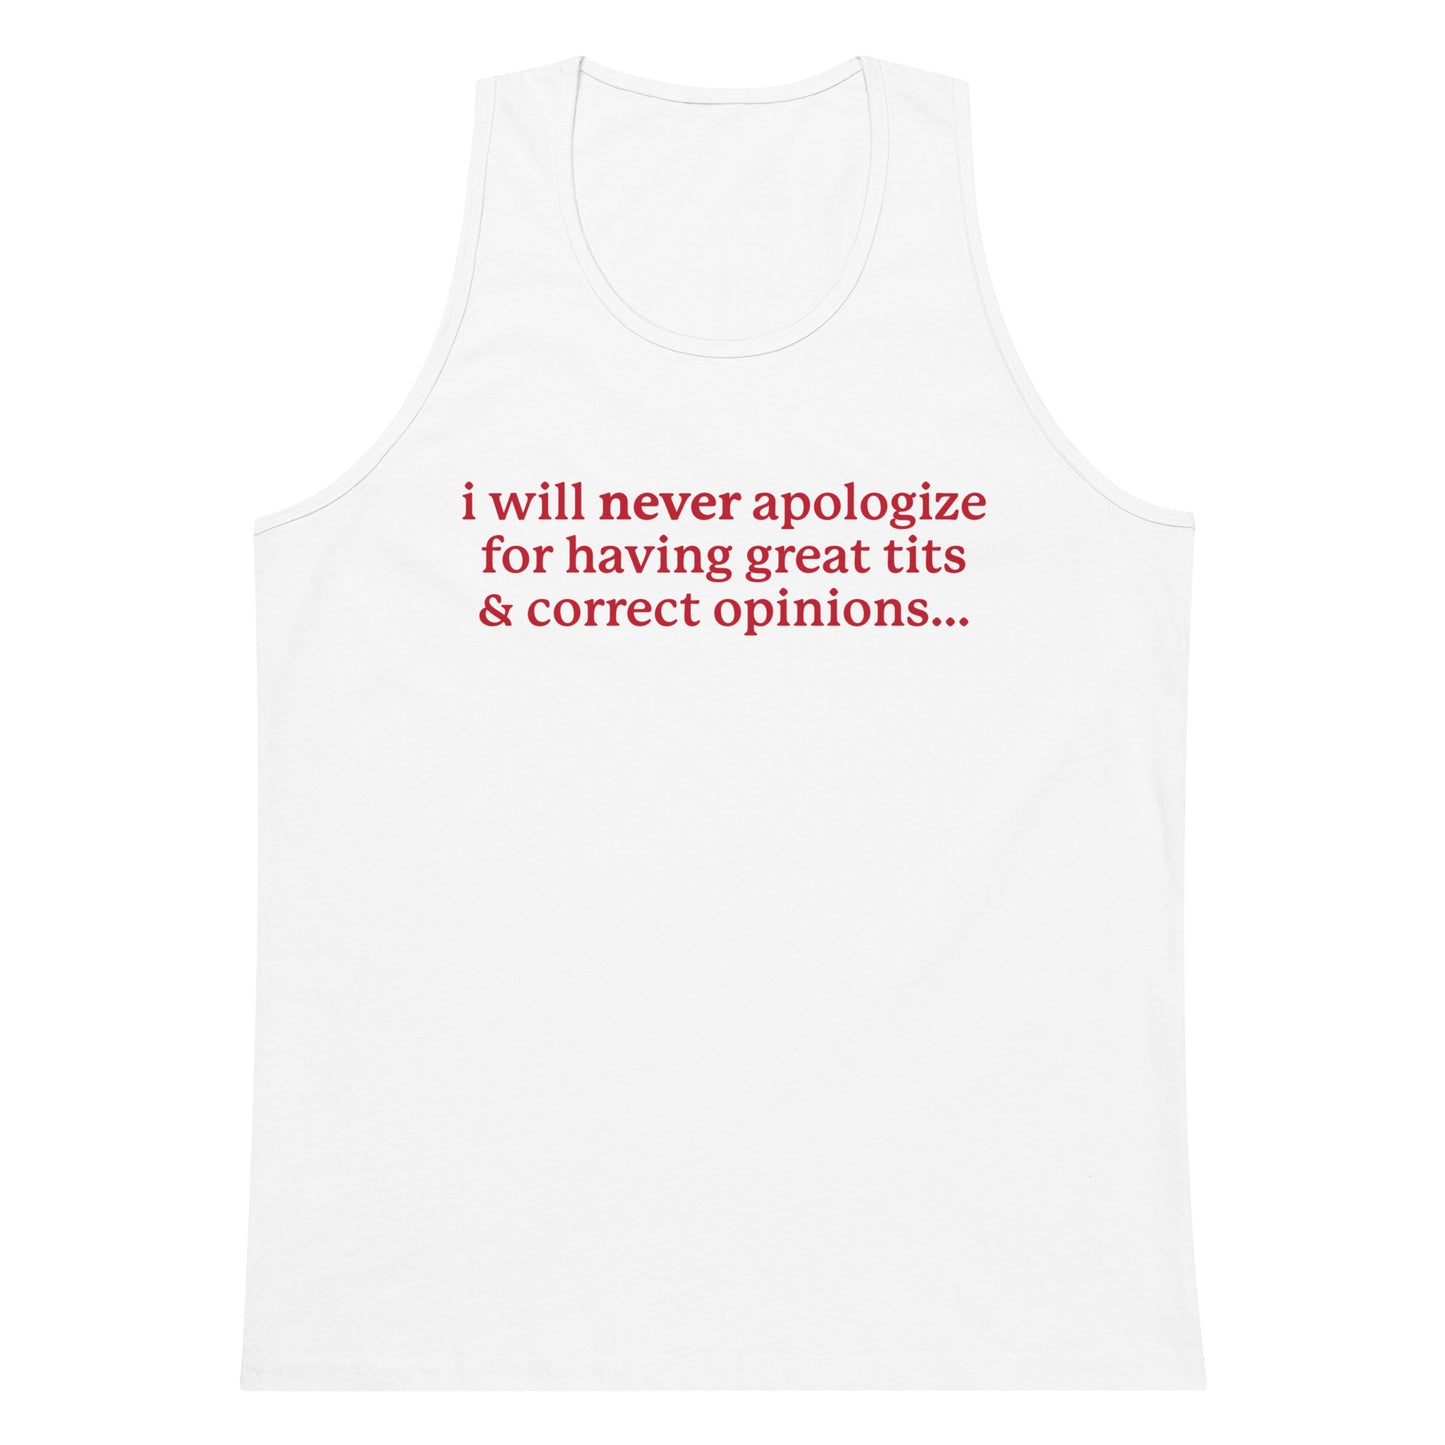 I Will Never Apologize (Great Tits & Correct Opinions) tank top